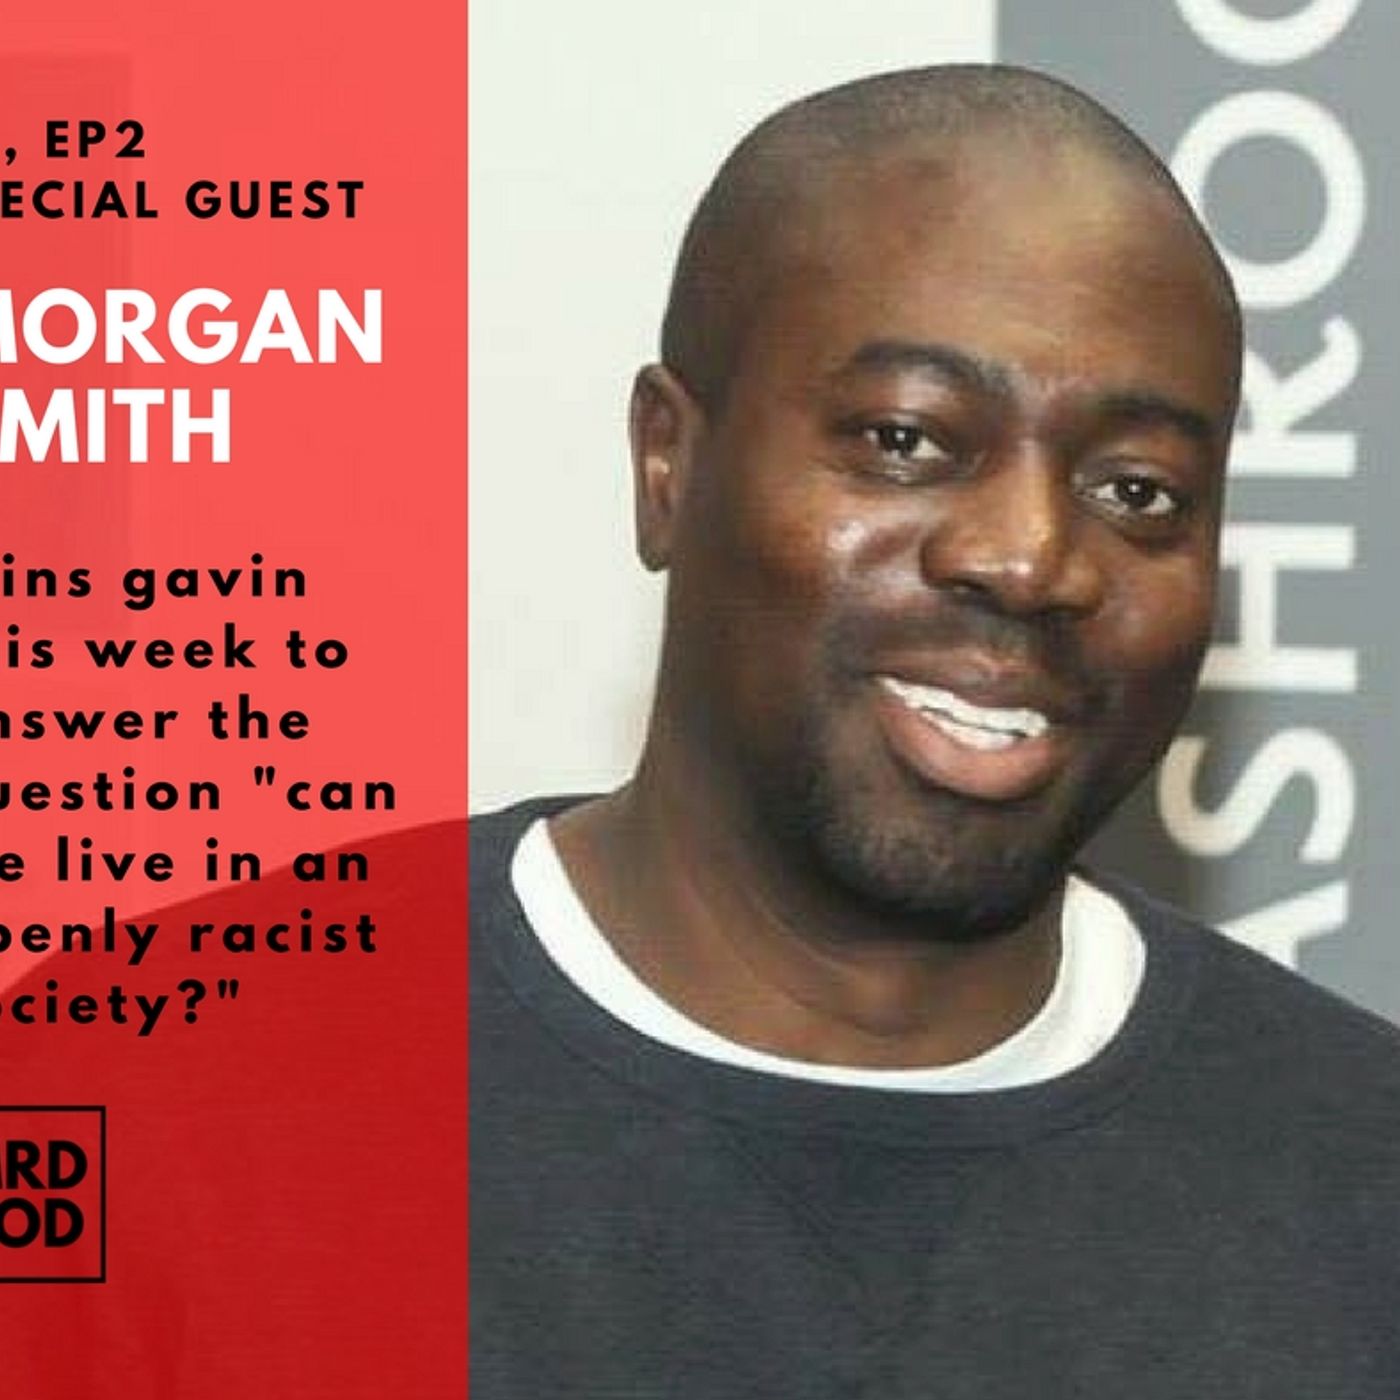 S02E02 - Can we live in an openly racist society?   - With Morgan Smith